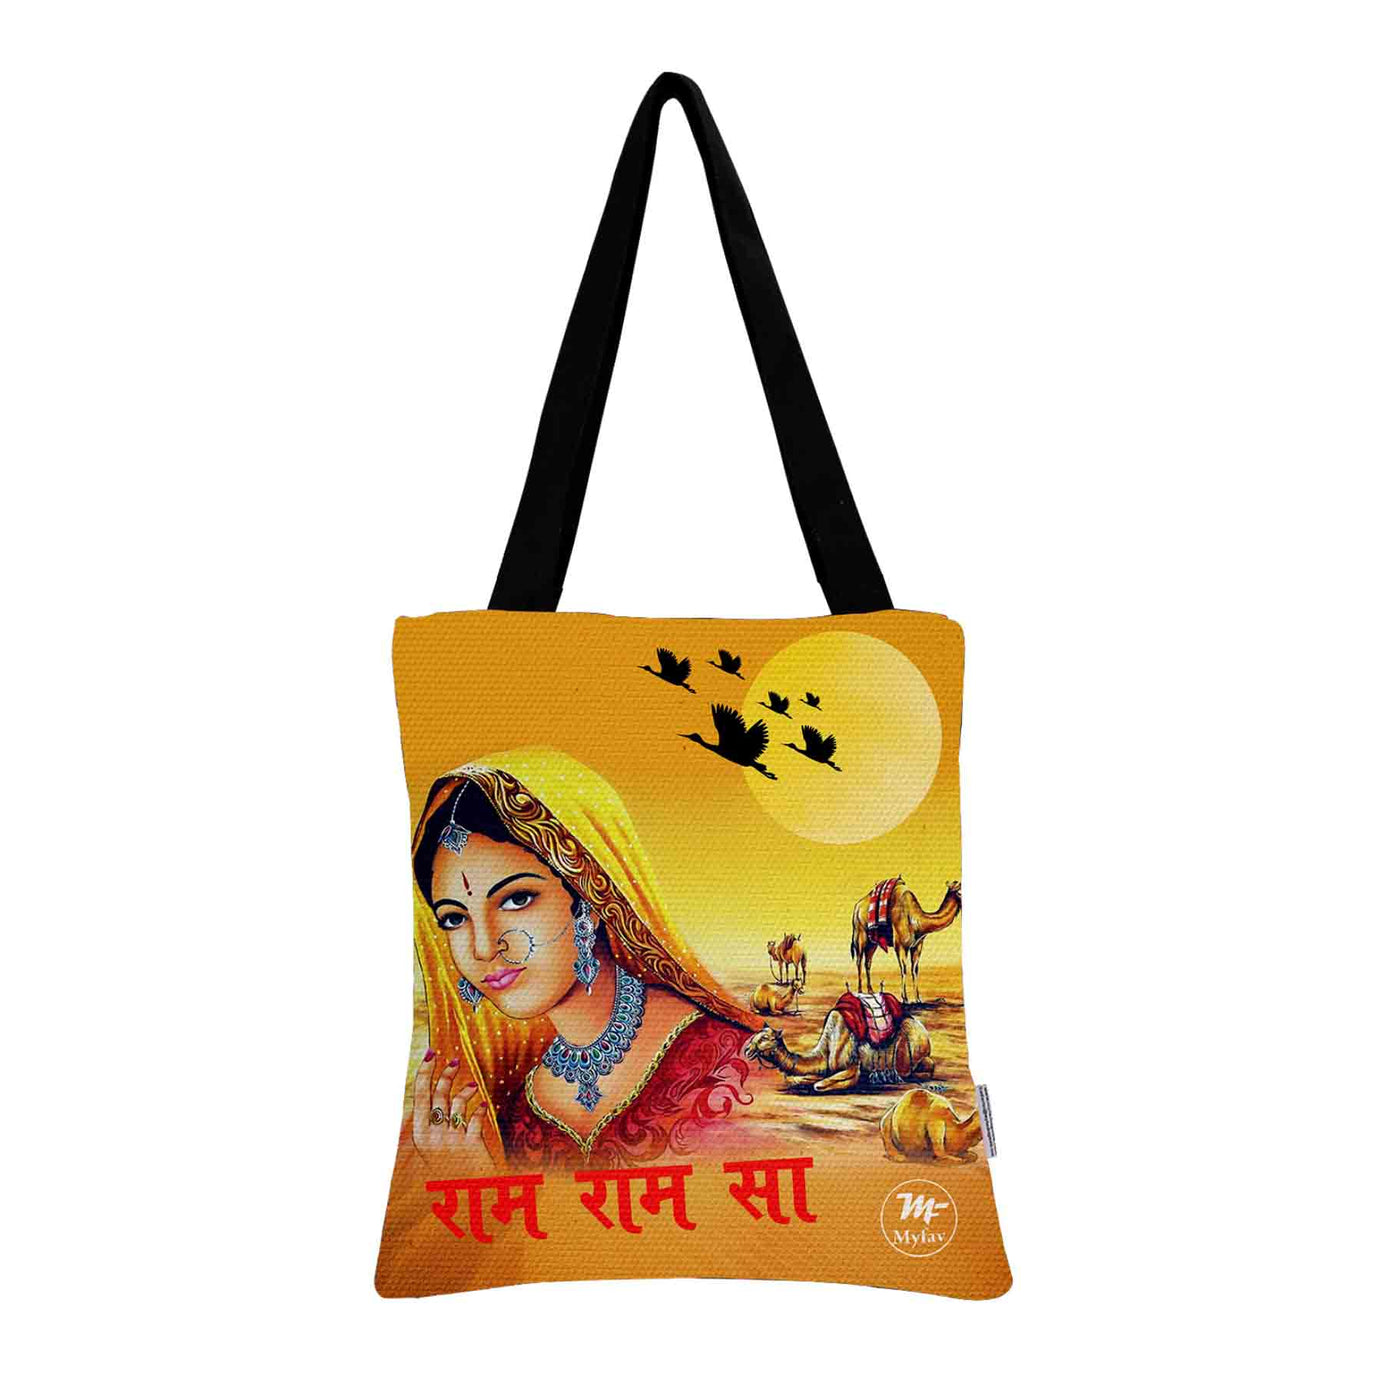 My Fav Traditional Printed Cotton Canvas Tote Bag